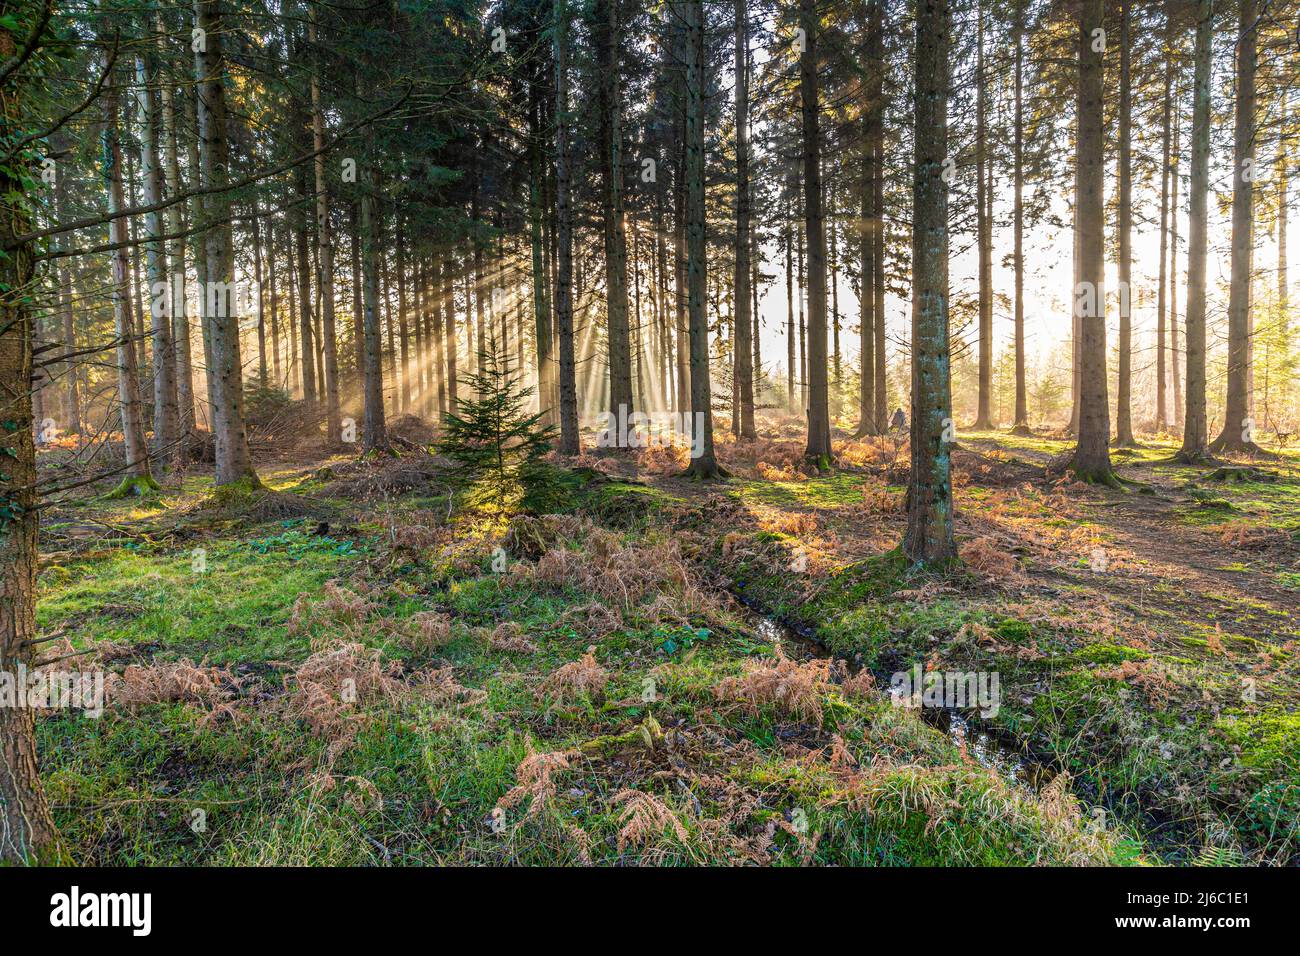 Winter in the Forest of Dean - Early morning mist near Ruspidge, Gloucestershire, England UK Stock Photo